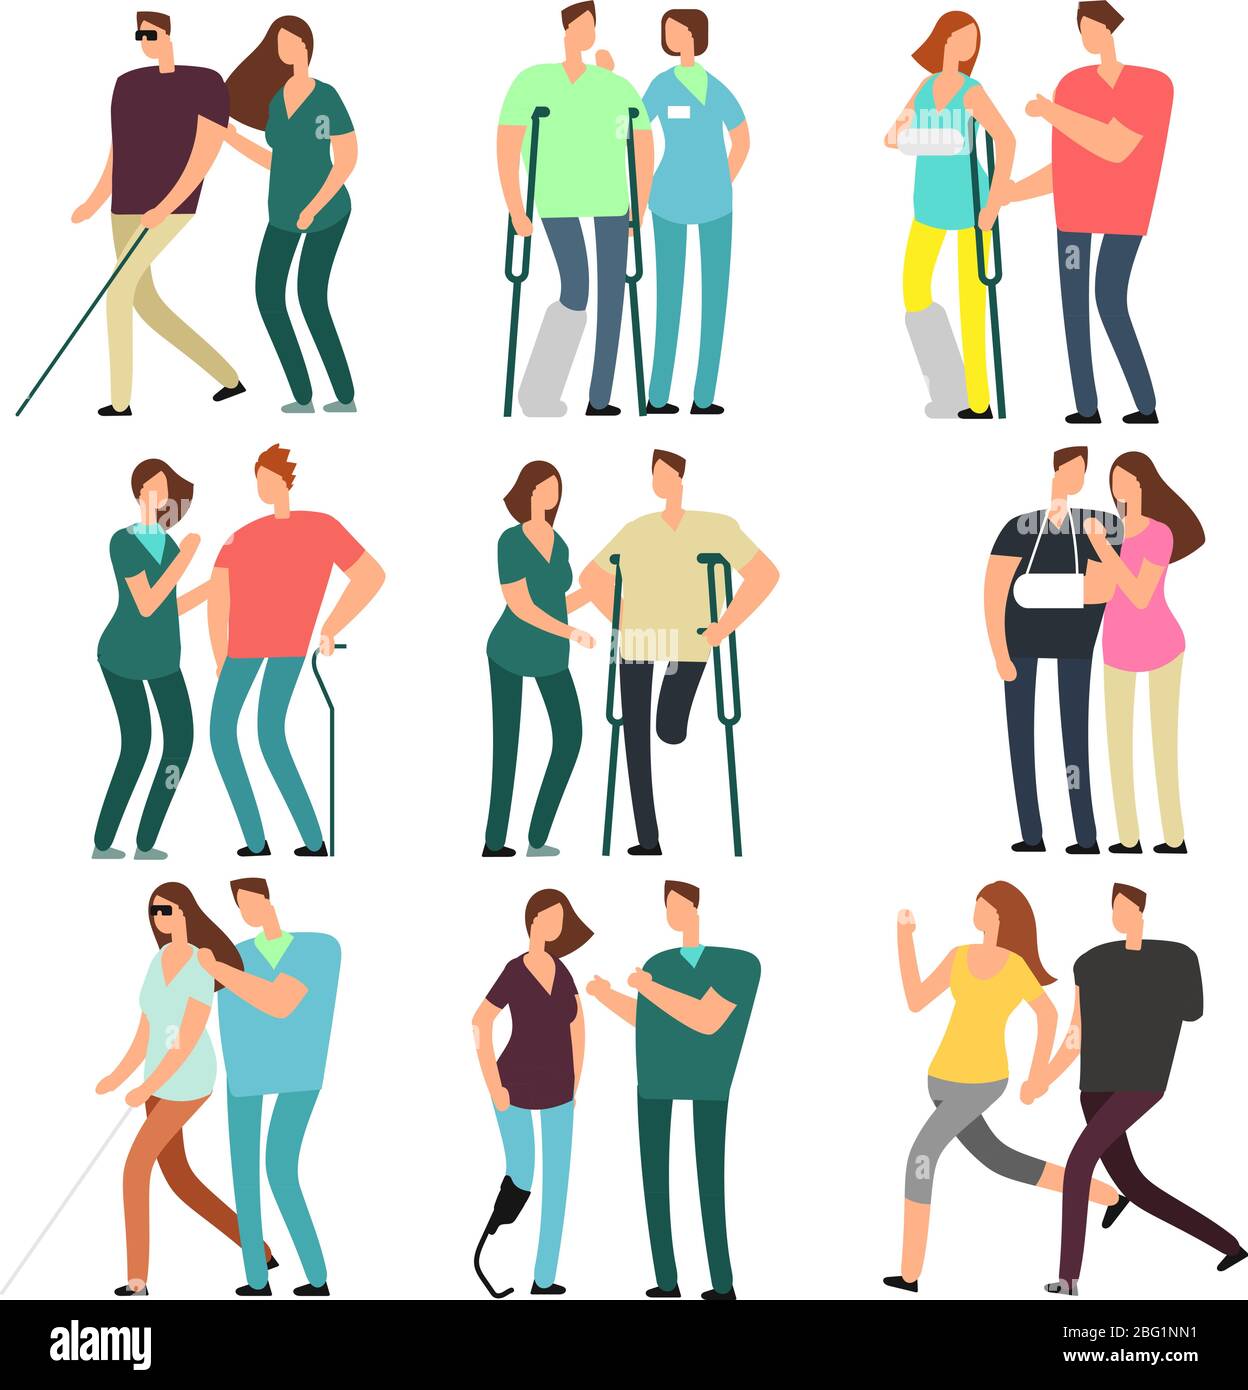 Disabled people with caring friends. Handicapped persons and medical assistants. Character disability patient walking, assistance and care friend. Vec Stock Vector